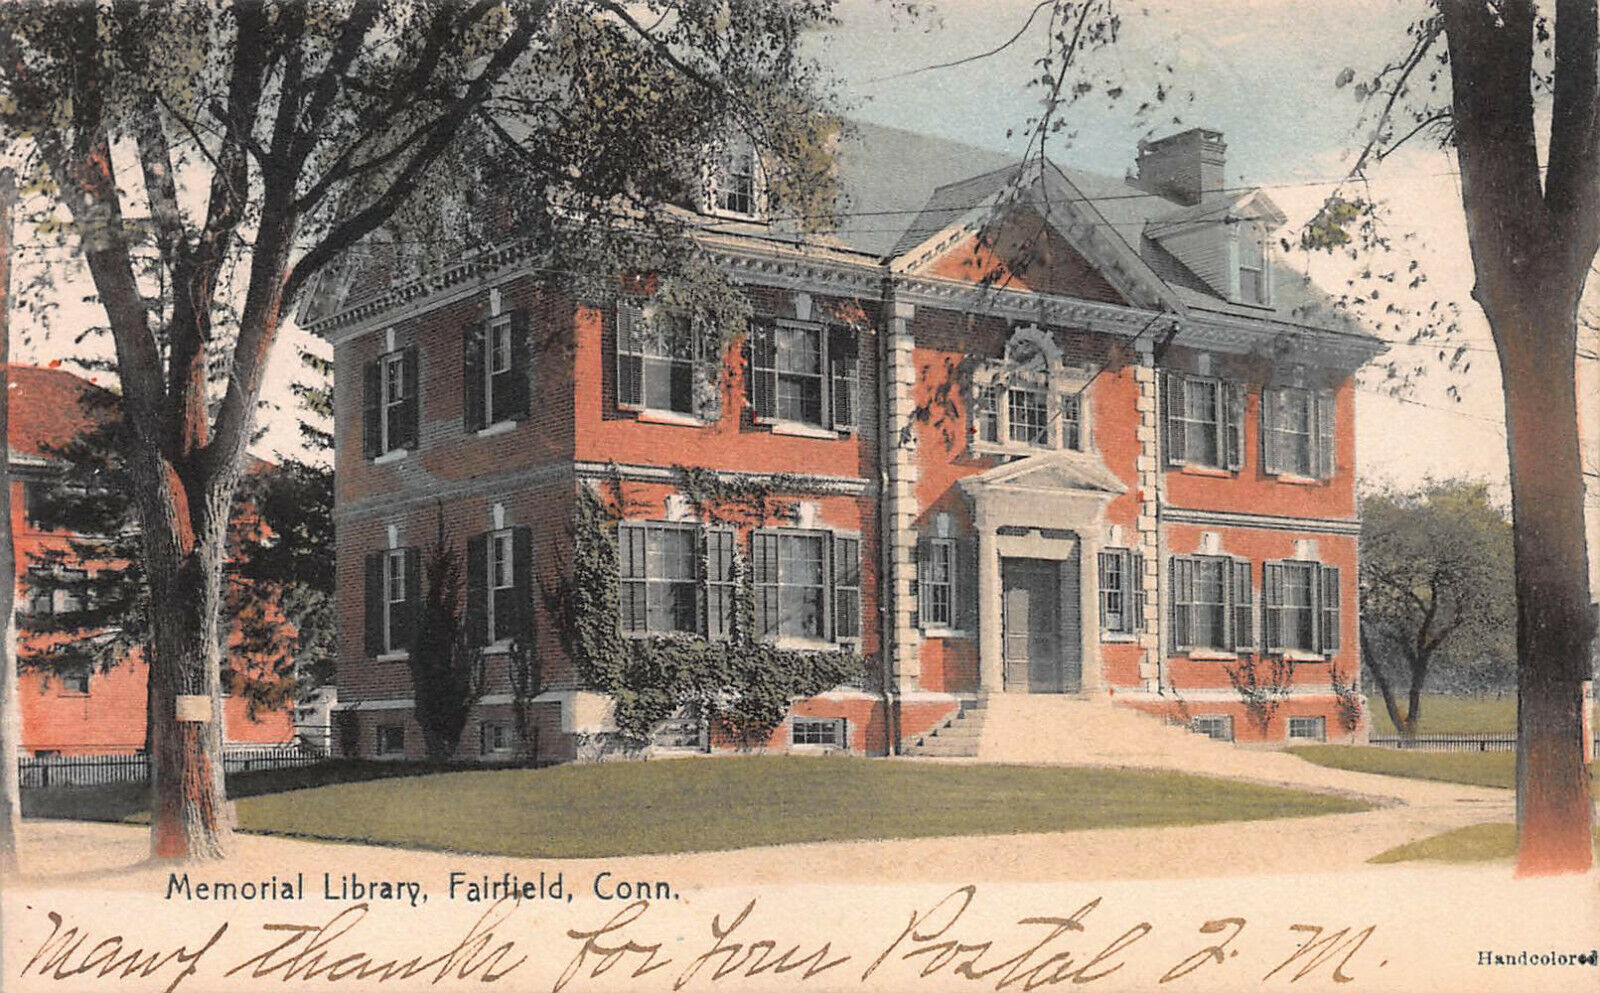 Memorial Library, Fairfield, Connecticut, Very Early Hand Colored Postcard